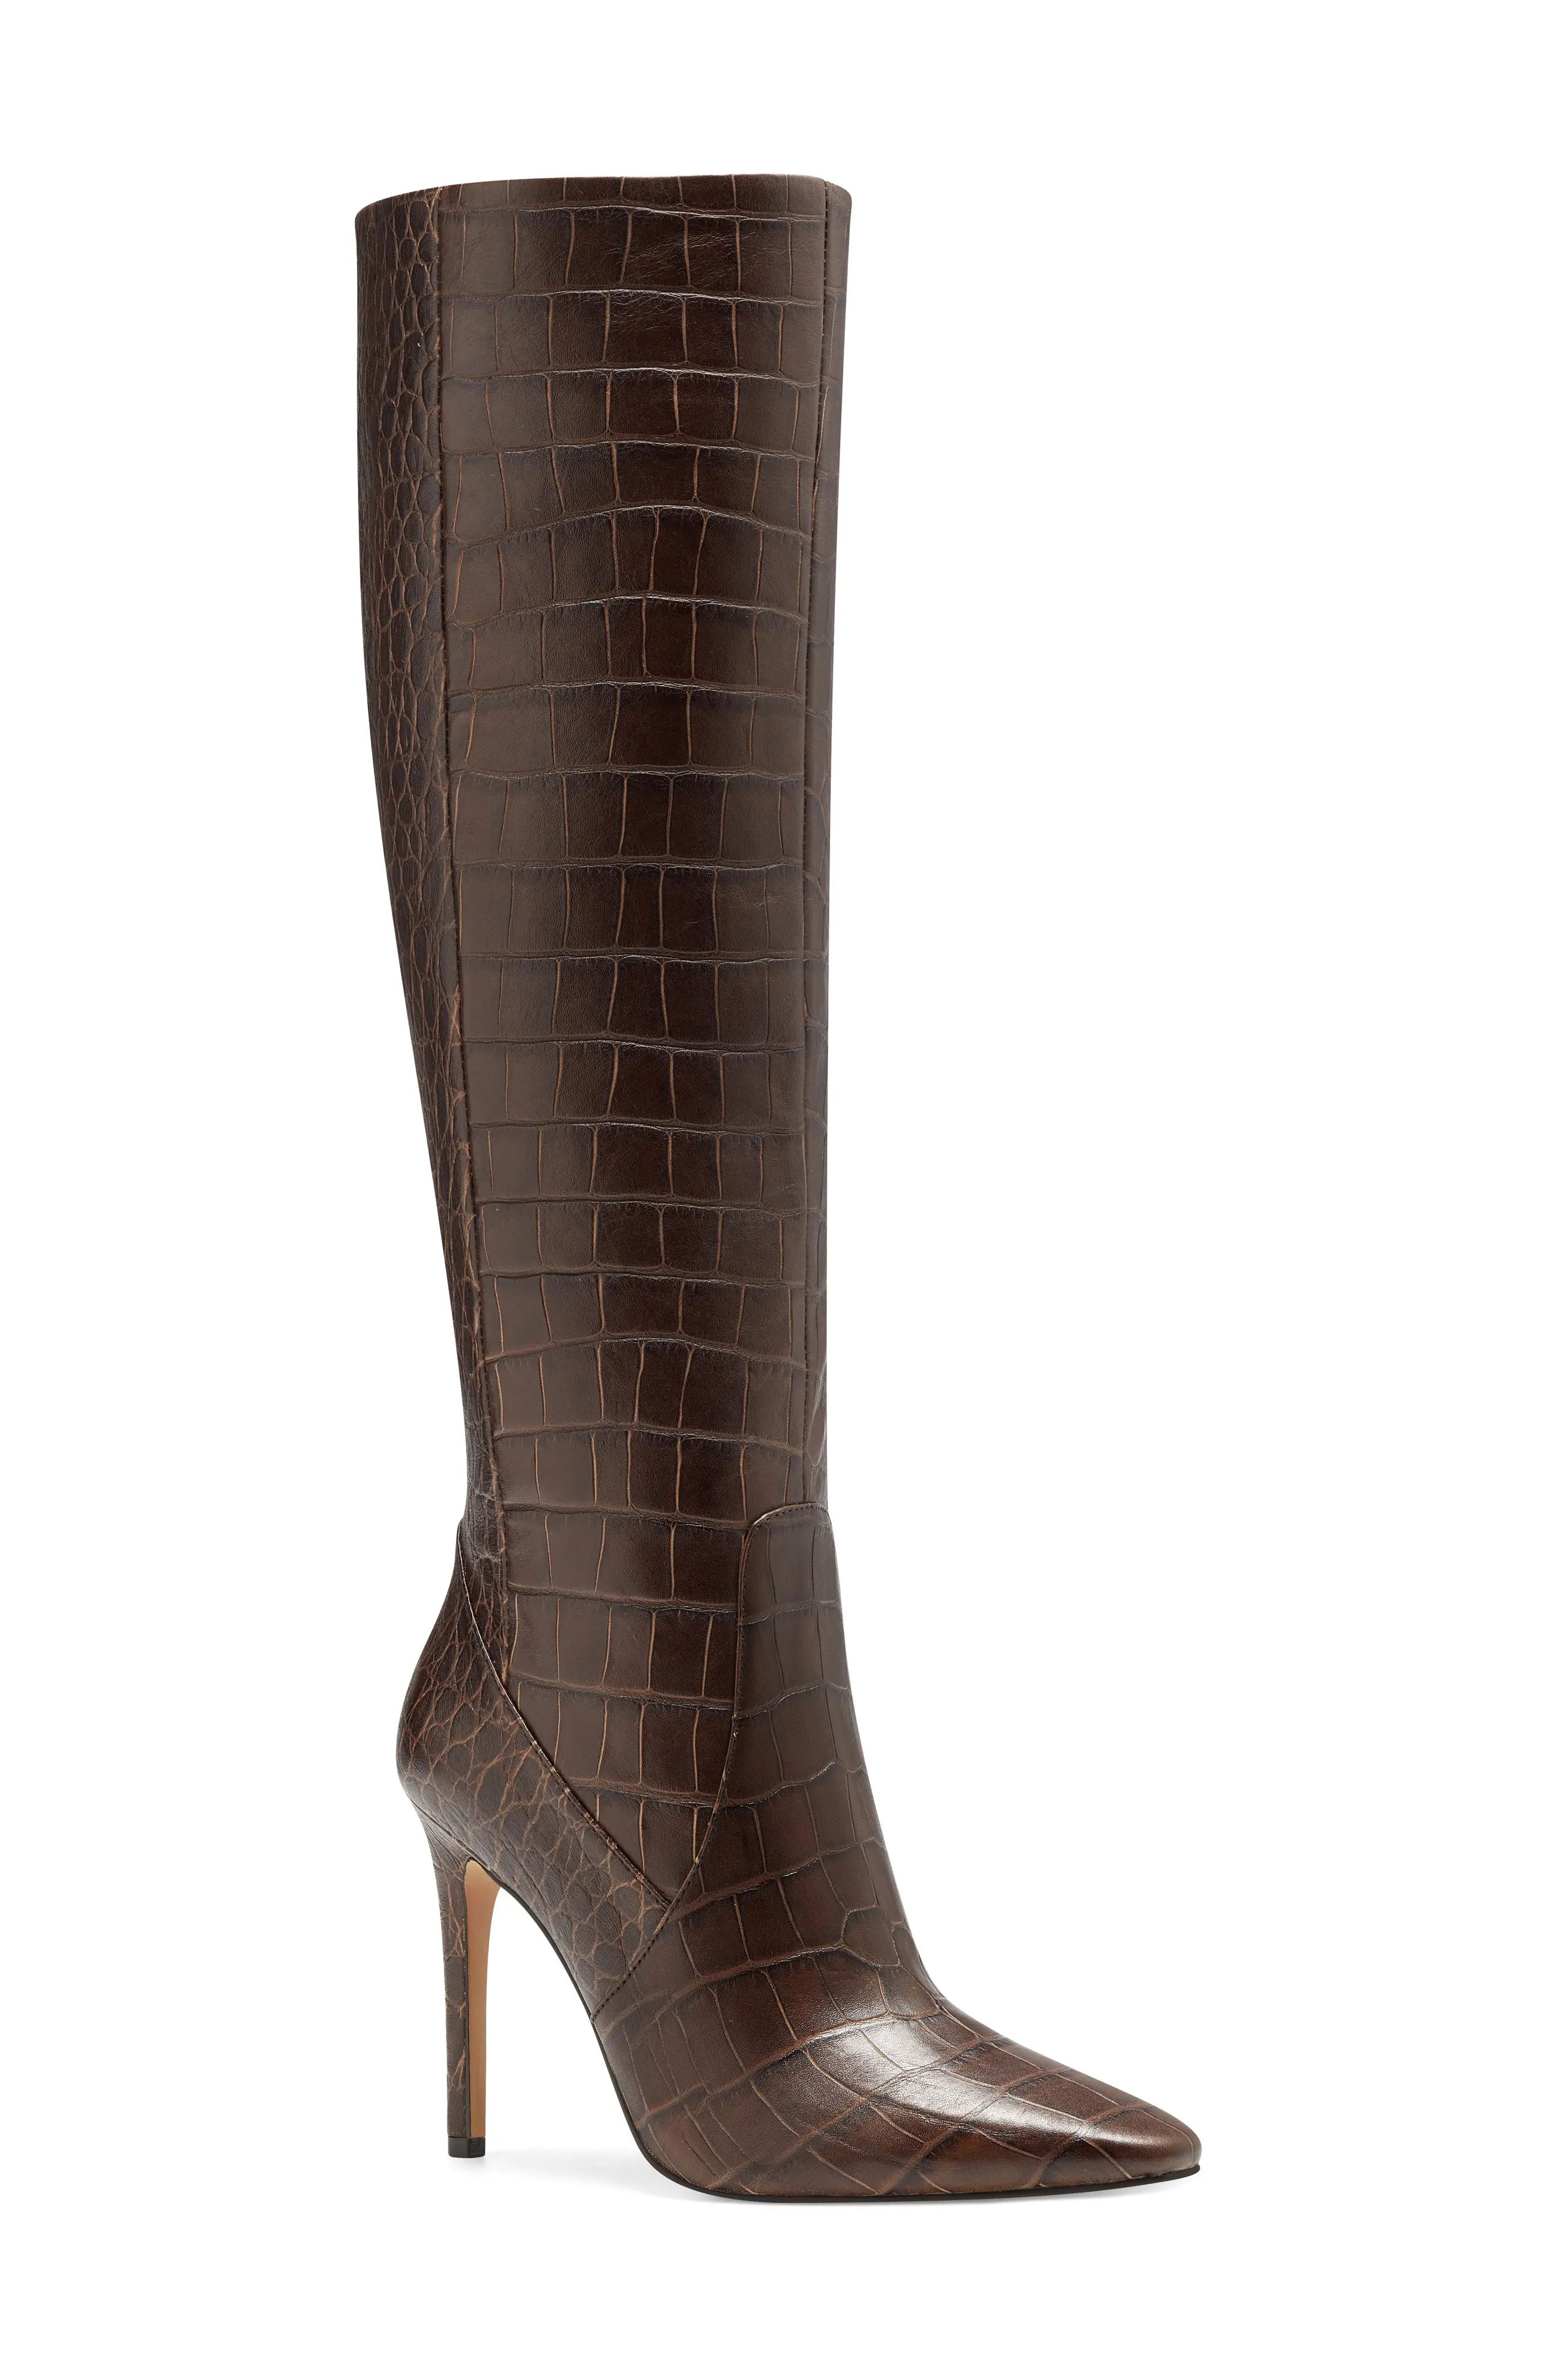 Women's Vince Camuto Fendels Knee High Boot, Size 6 M - Brown | Nordstrom